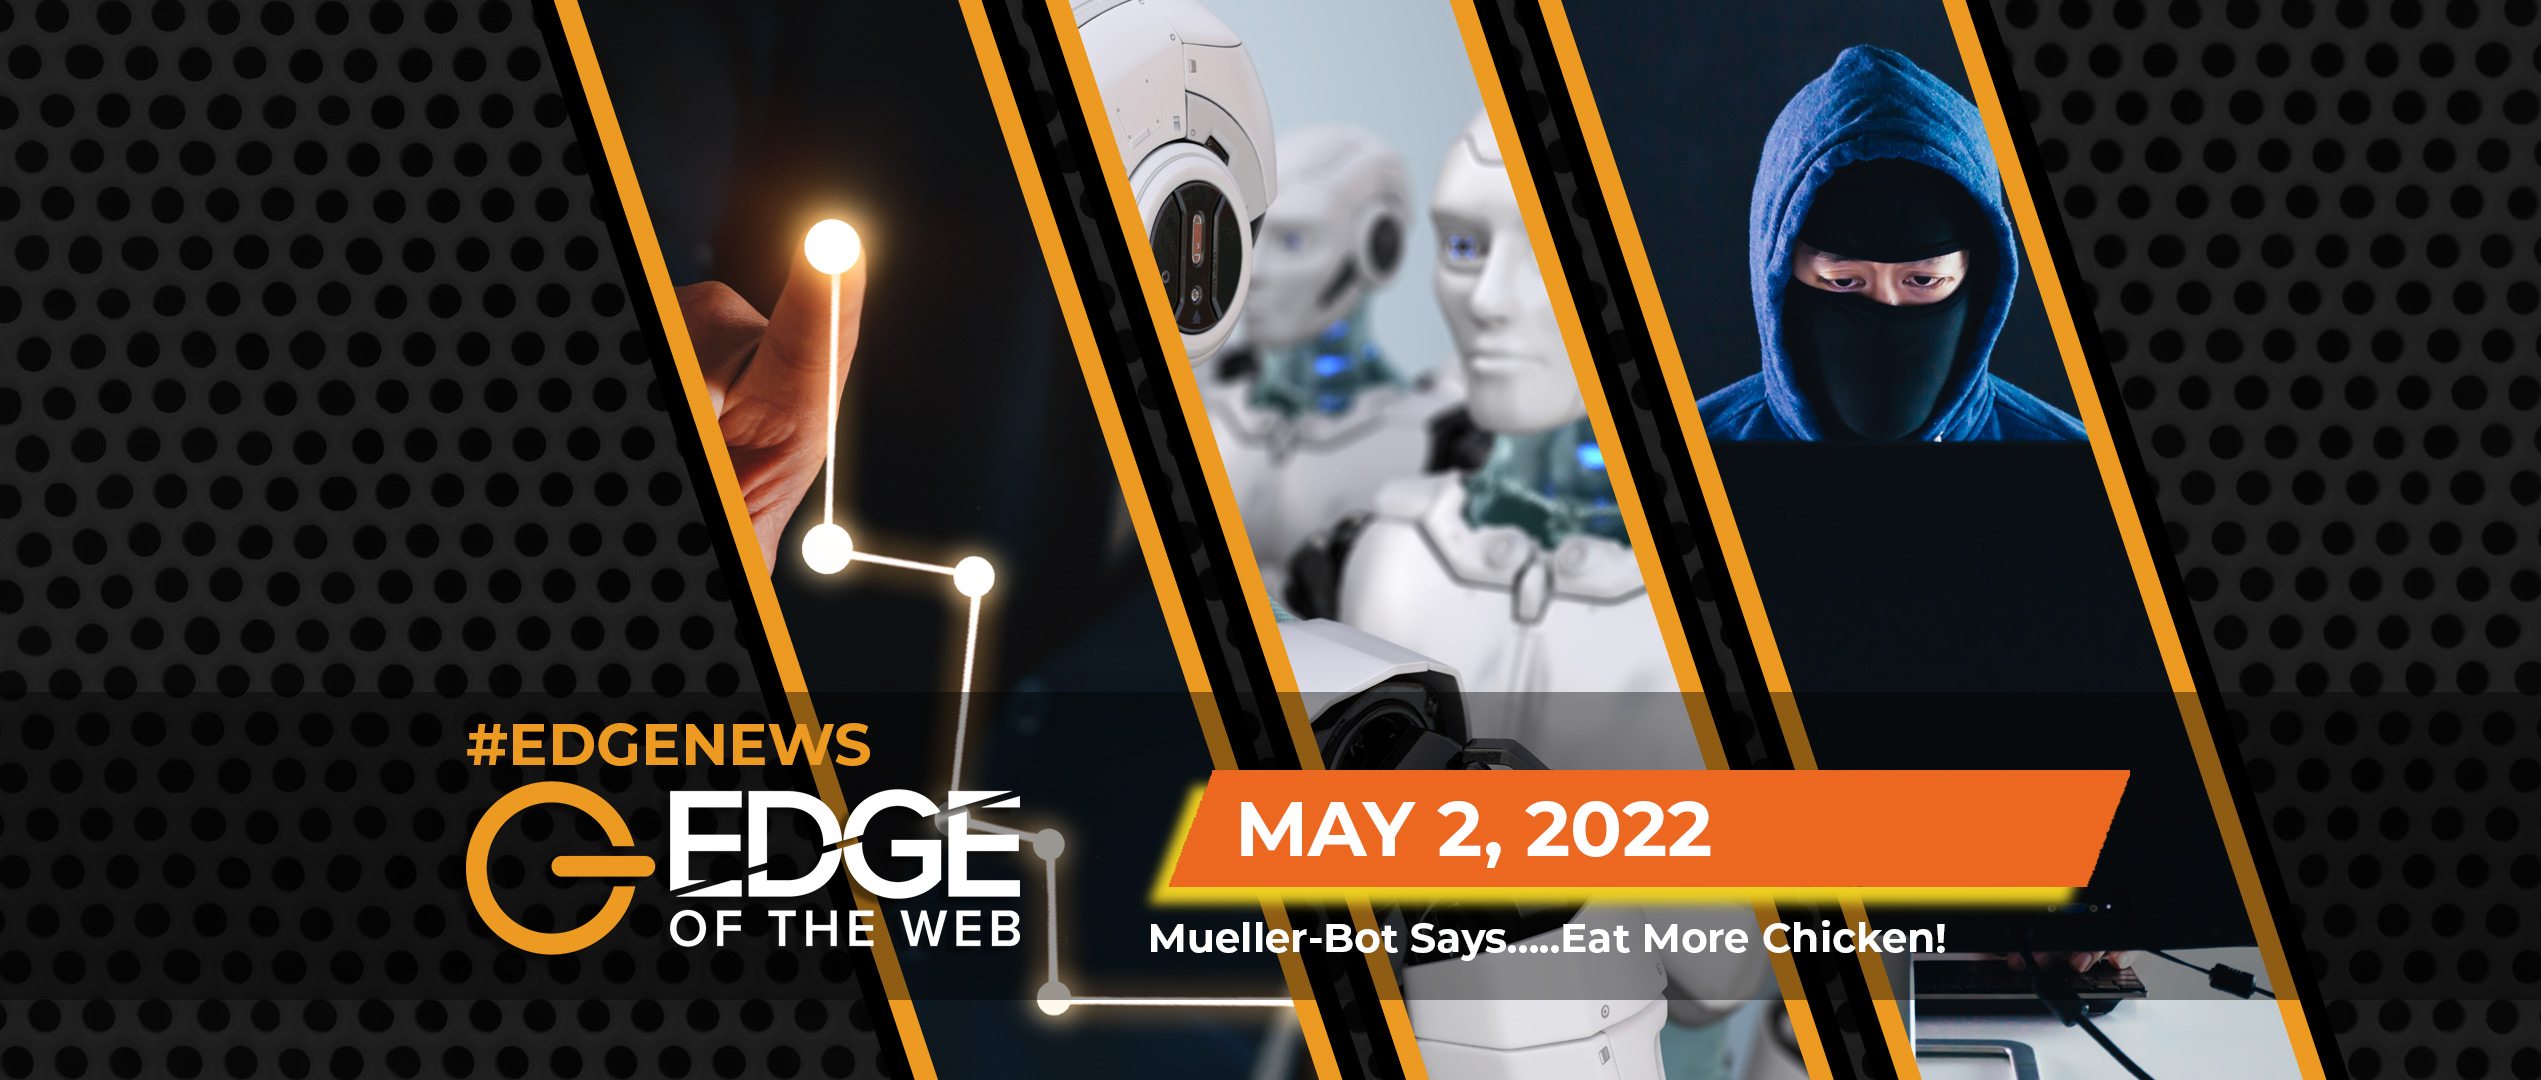 496 | News from the EDGE | Week of 5.2.2022